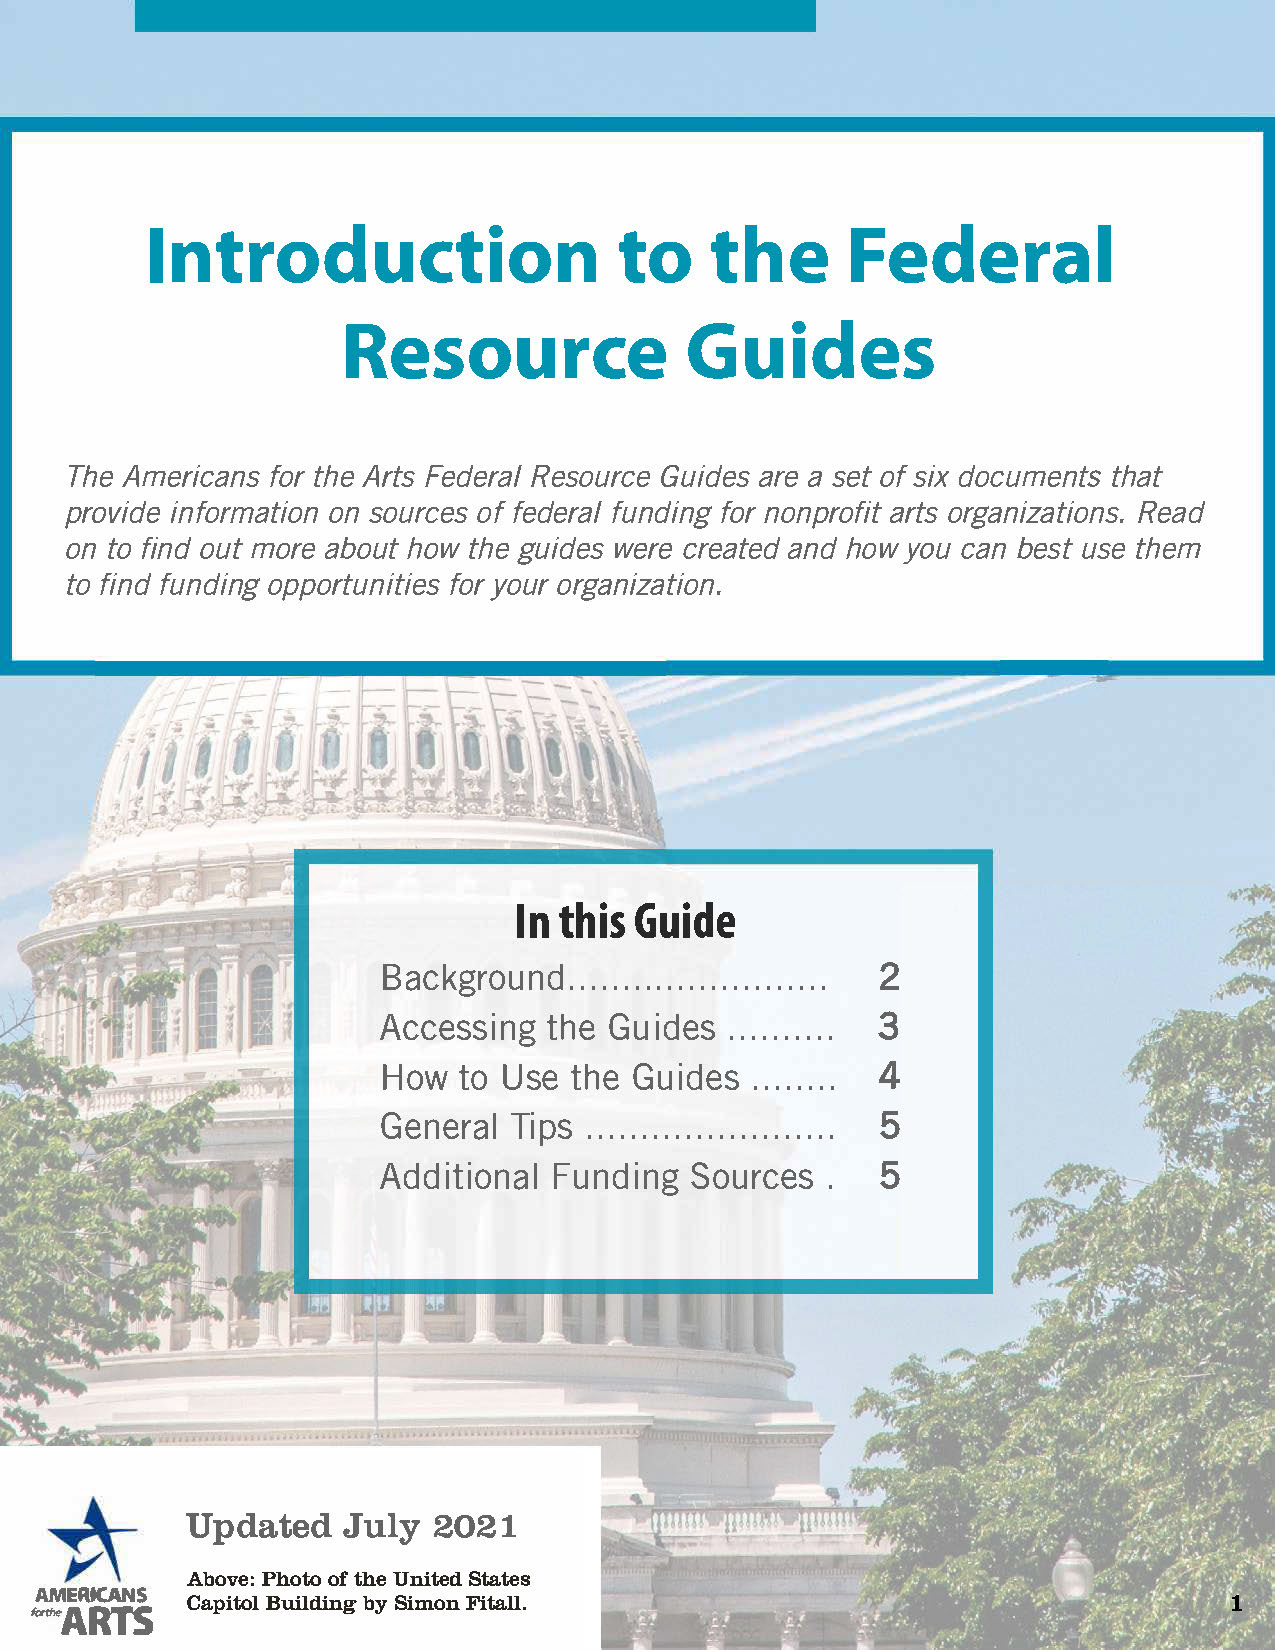 A thumnail cover image of the Introduction guide, featuring an image of the US Capitol Building.